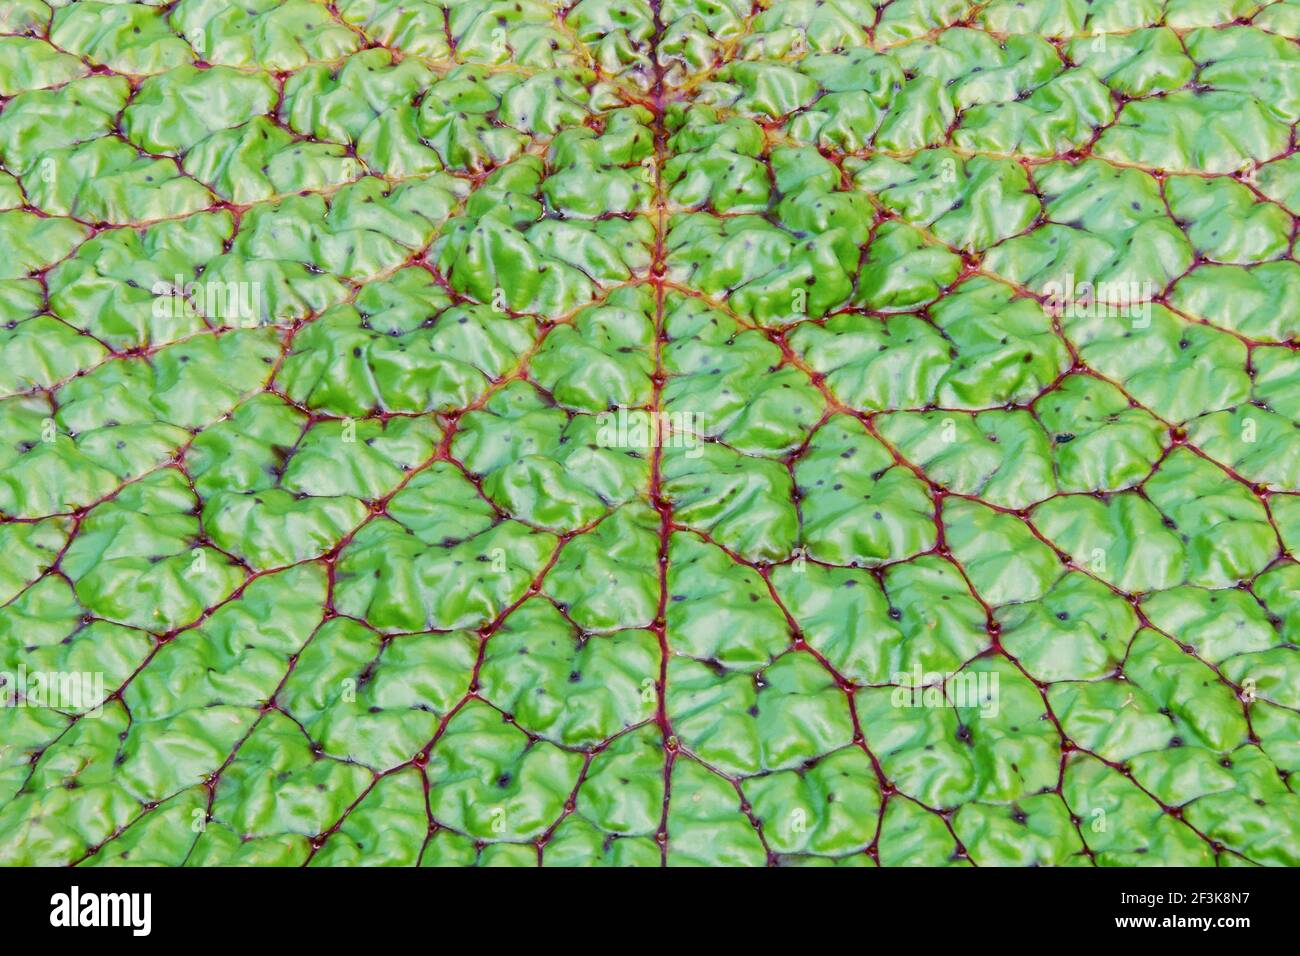 Green Leaf of Prickly Waterlily Natural Abstract Pattern Background Stock Photo